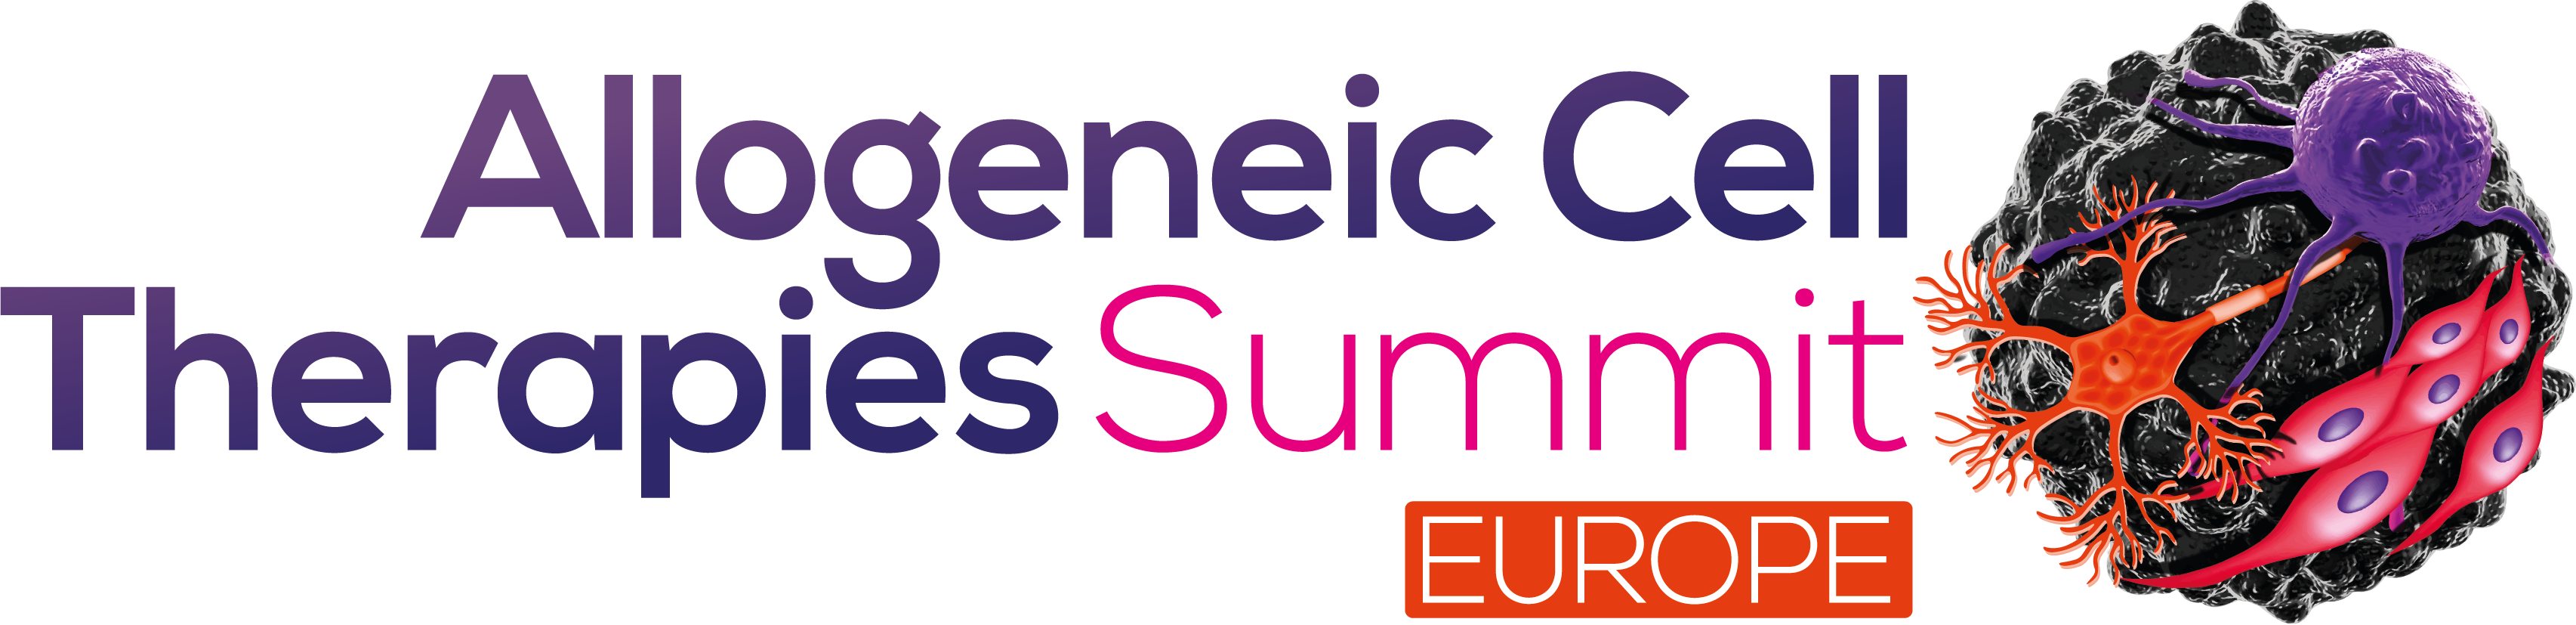 3rd Allogeneic Cell Therapies Summit Europe Logo